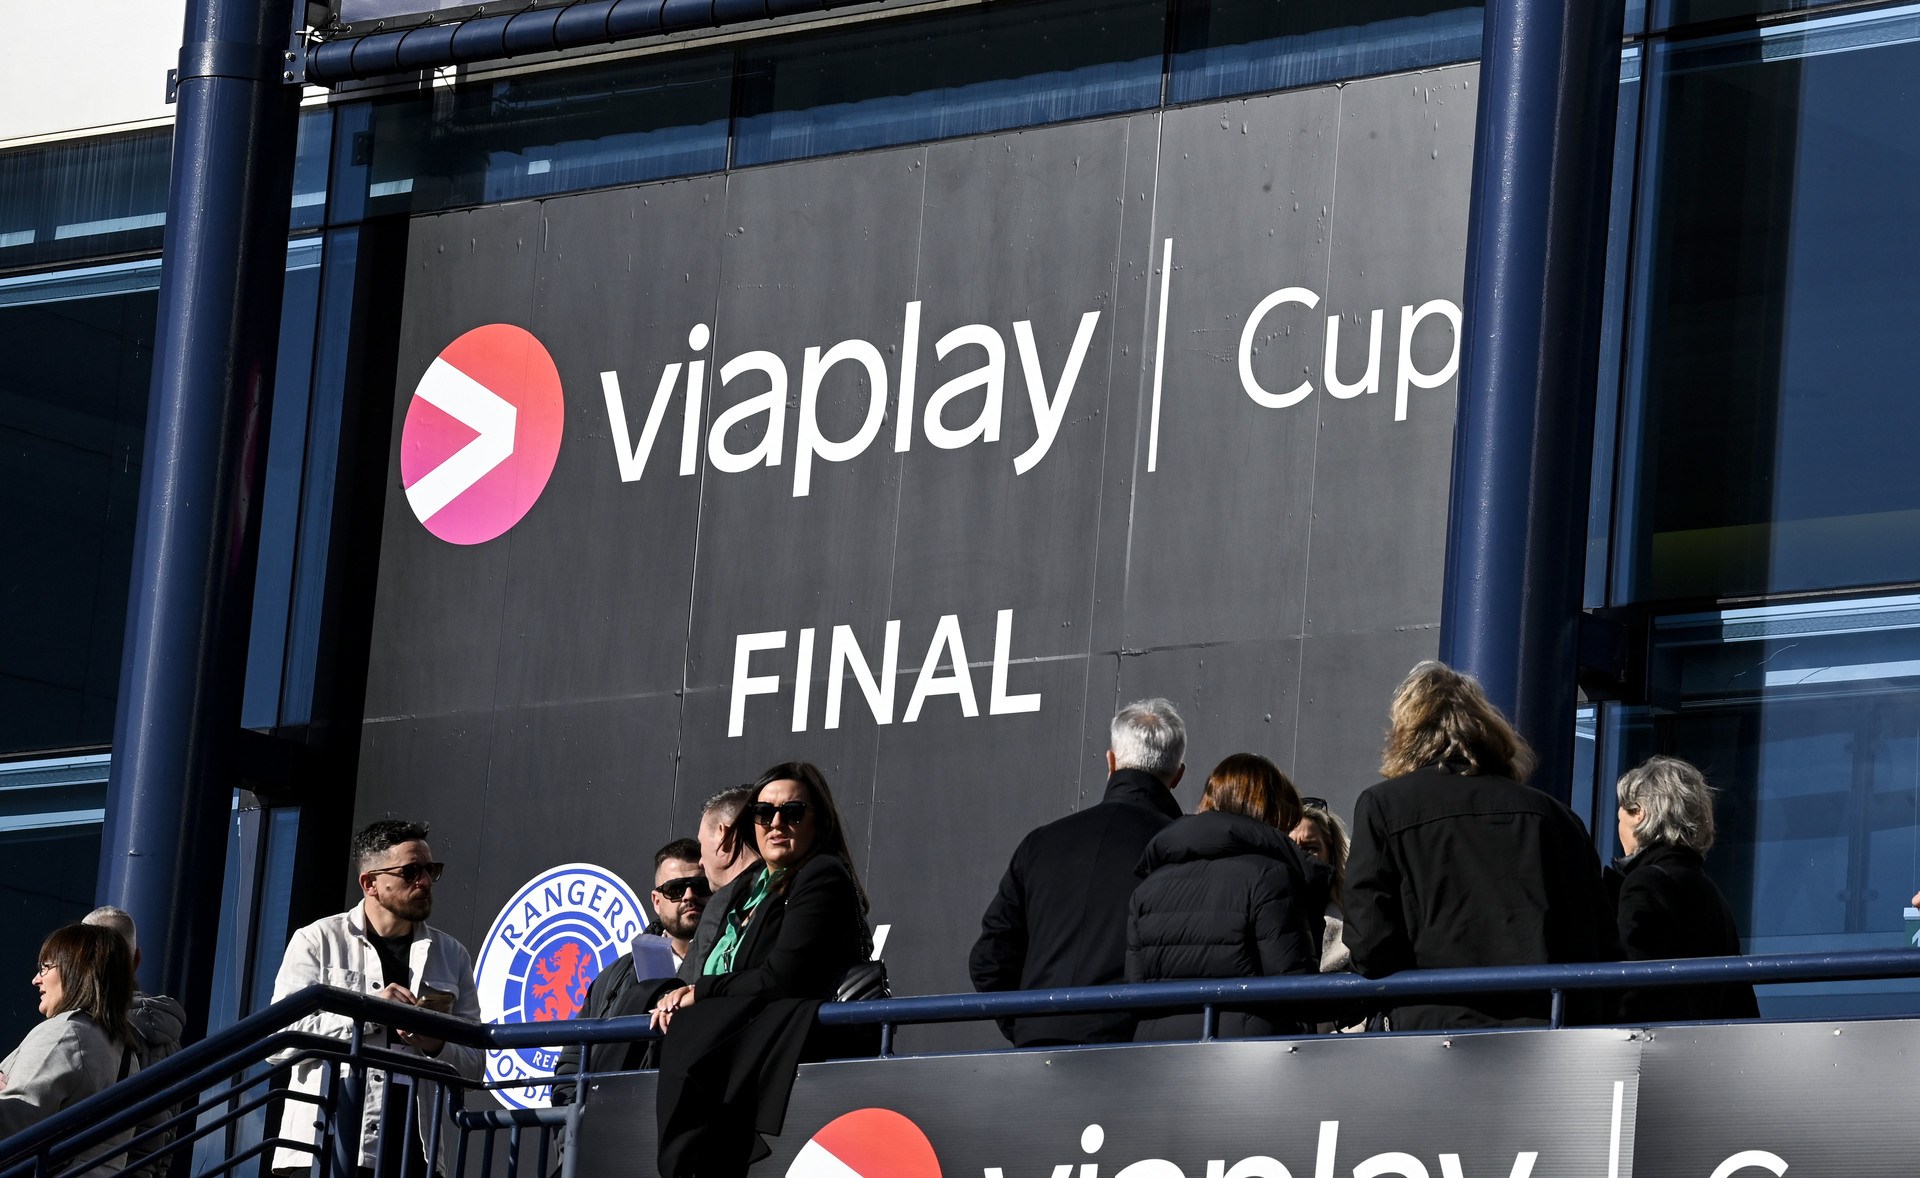 Viaplay branding during the Viaplay Cup final between Rangers and Celtic at Hampden Park in February. 